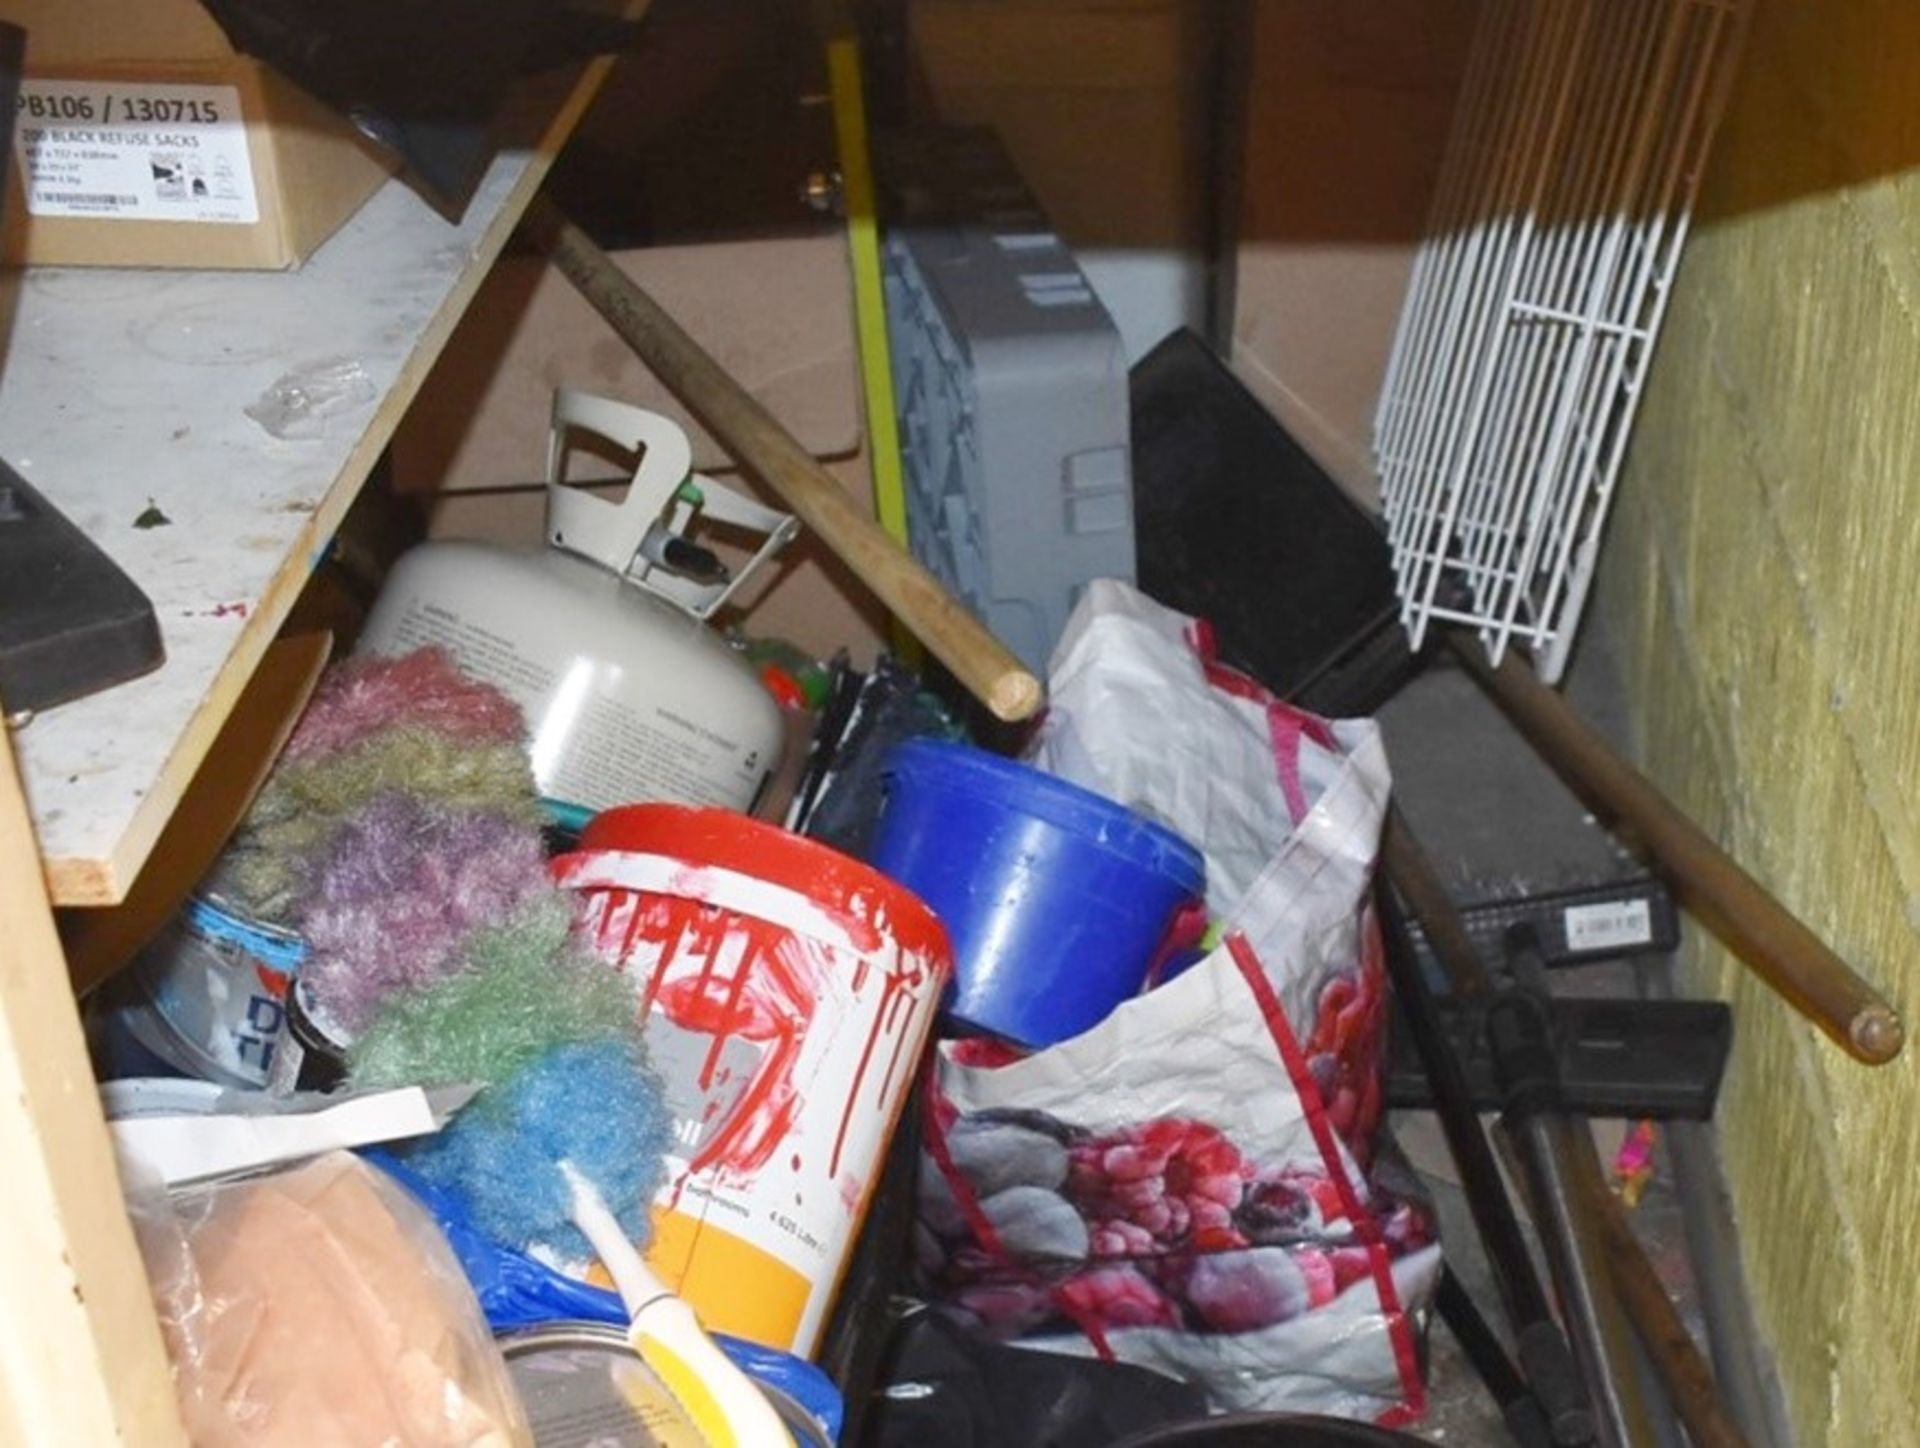 Assorted Job Lot of Items From Storage Room - Includes Helium Balloon Kit, Dishwasher Trays,